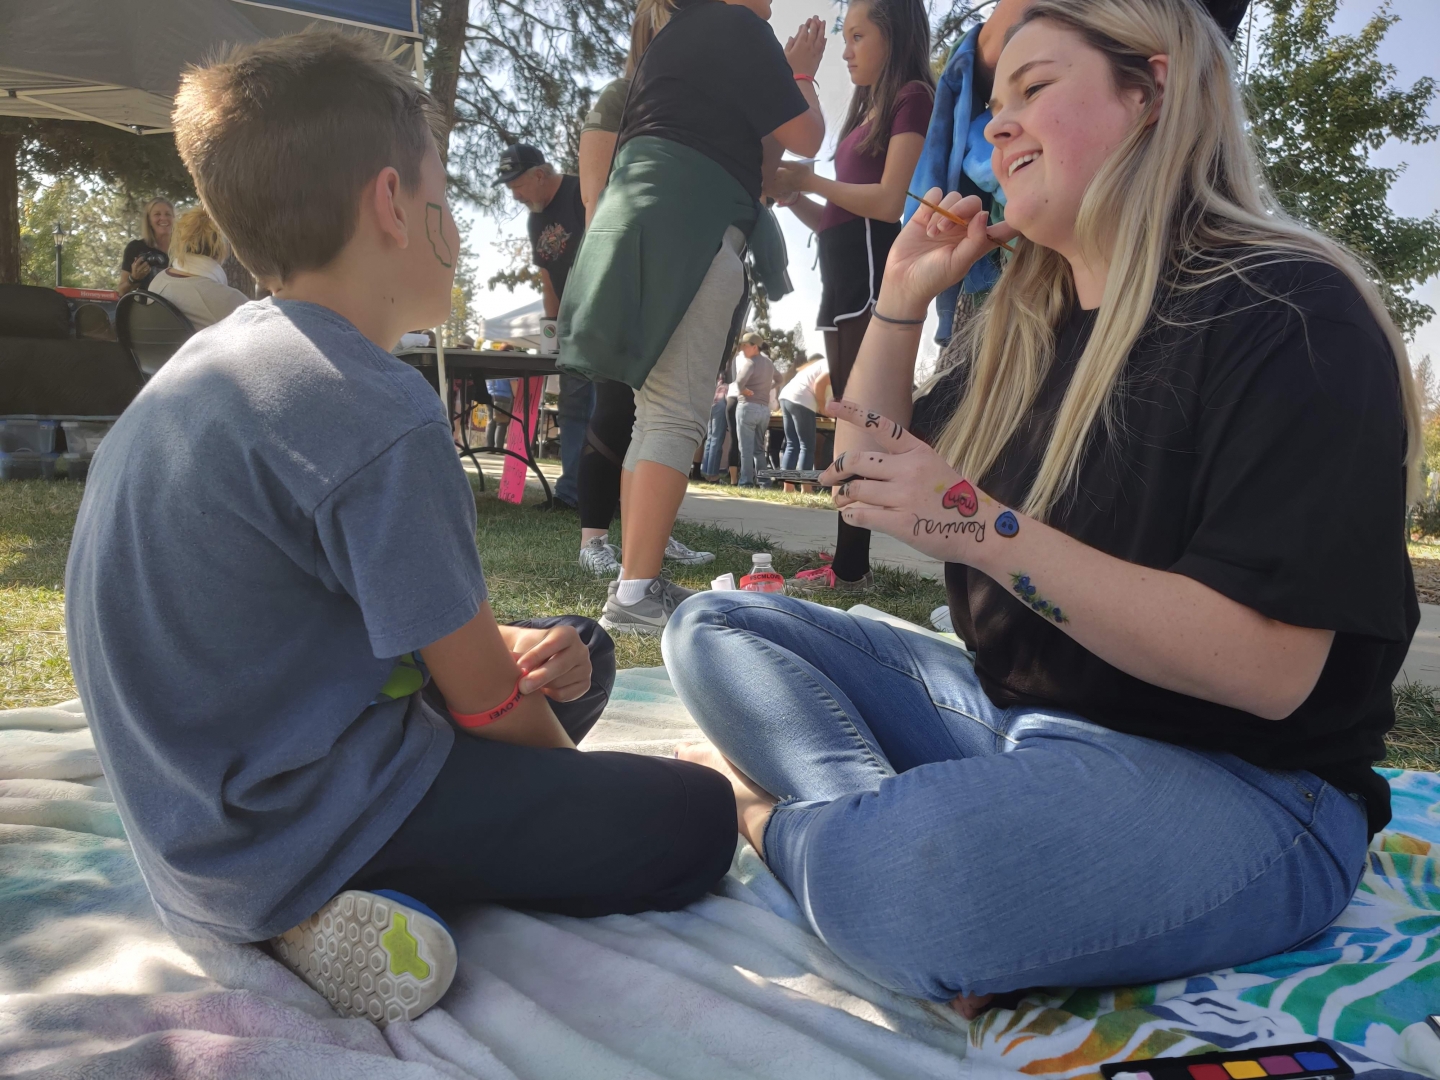 A boy sits to have the outline of California painted on his cheek by a smiling young woman while they sit on blankets on the grass.